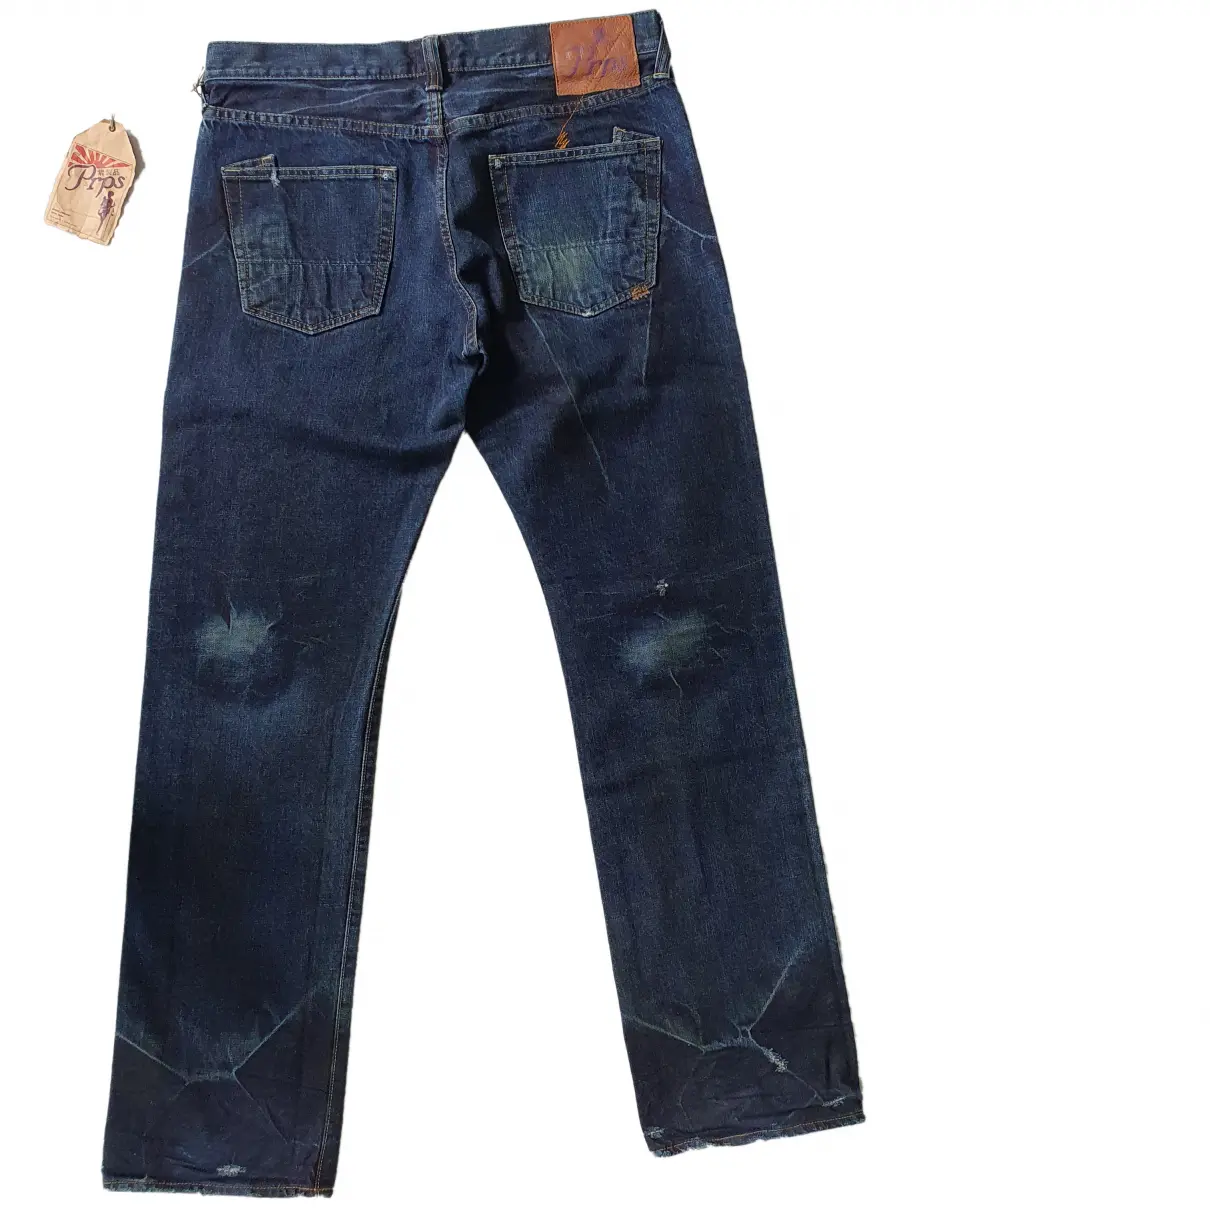 Buy Prps Straight jeans online